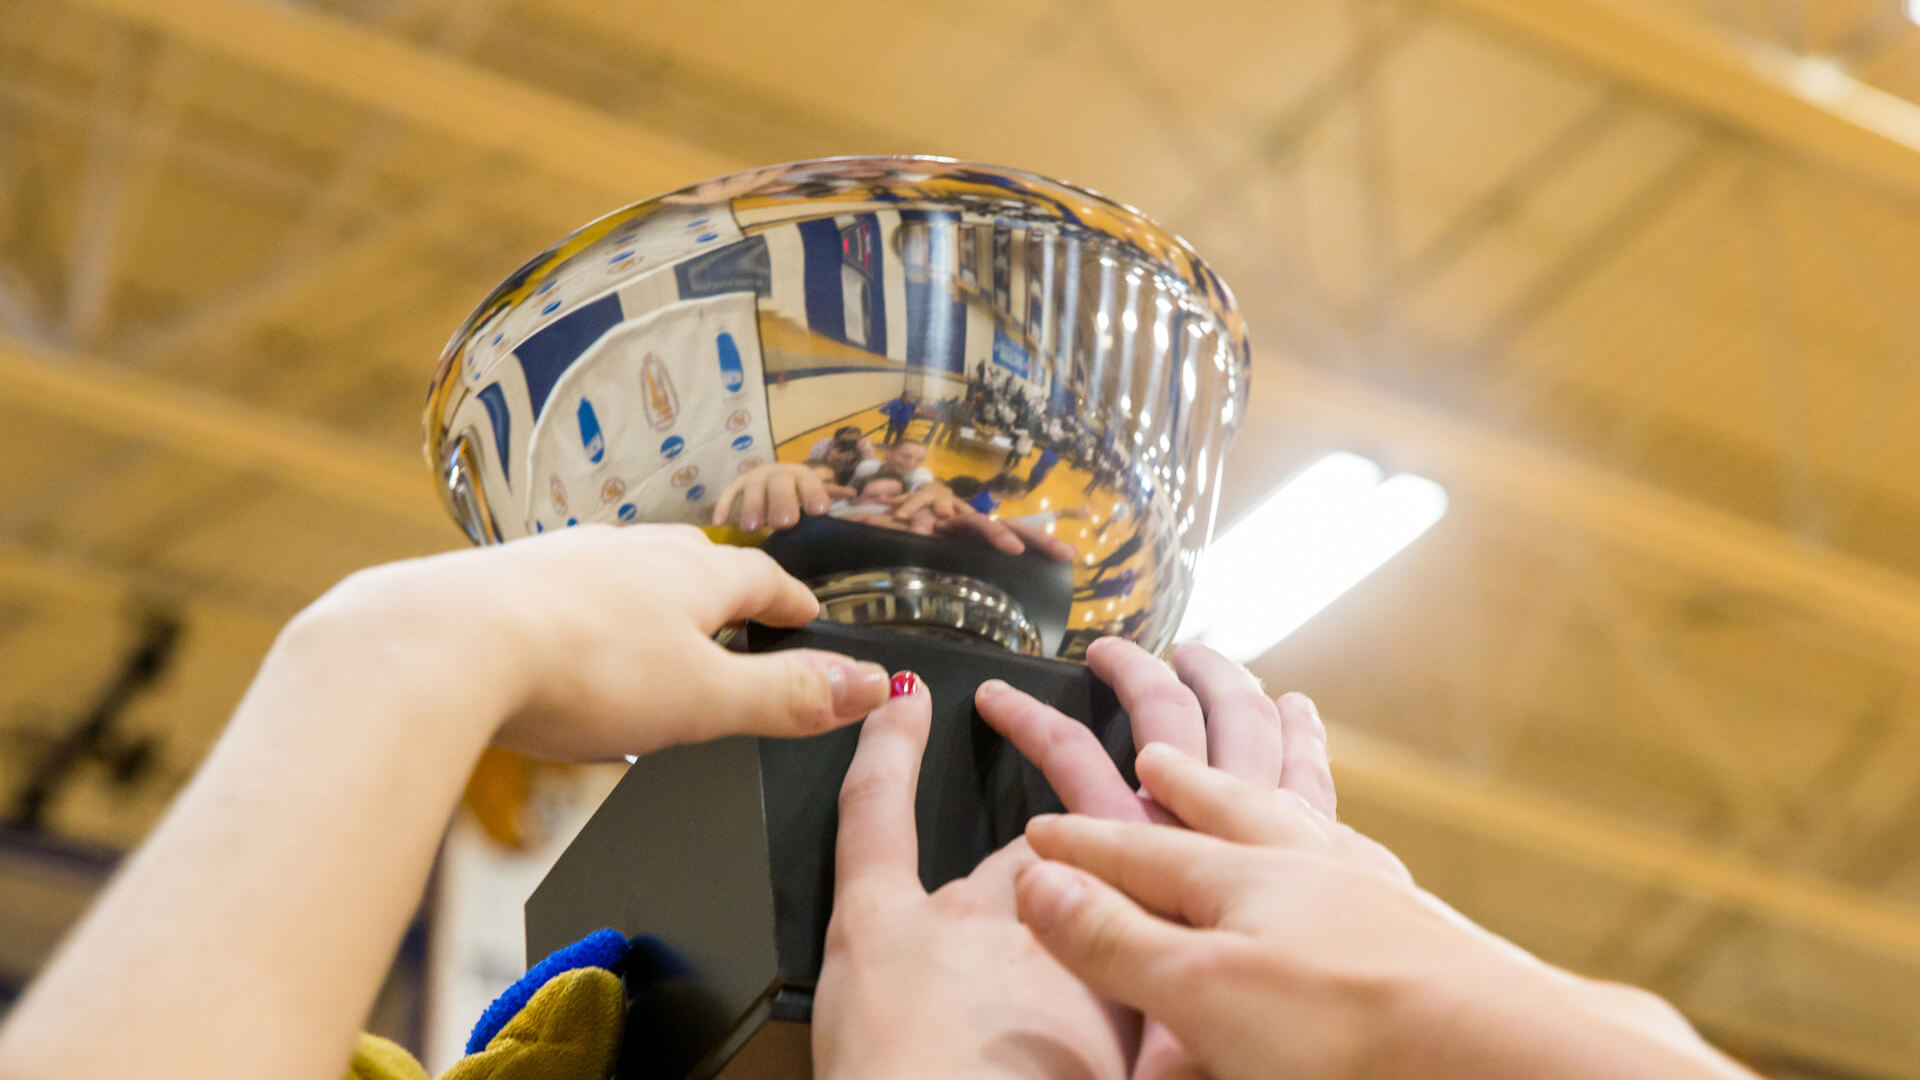 JWU's women's volleyball team holding a trophy up in the air.